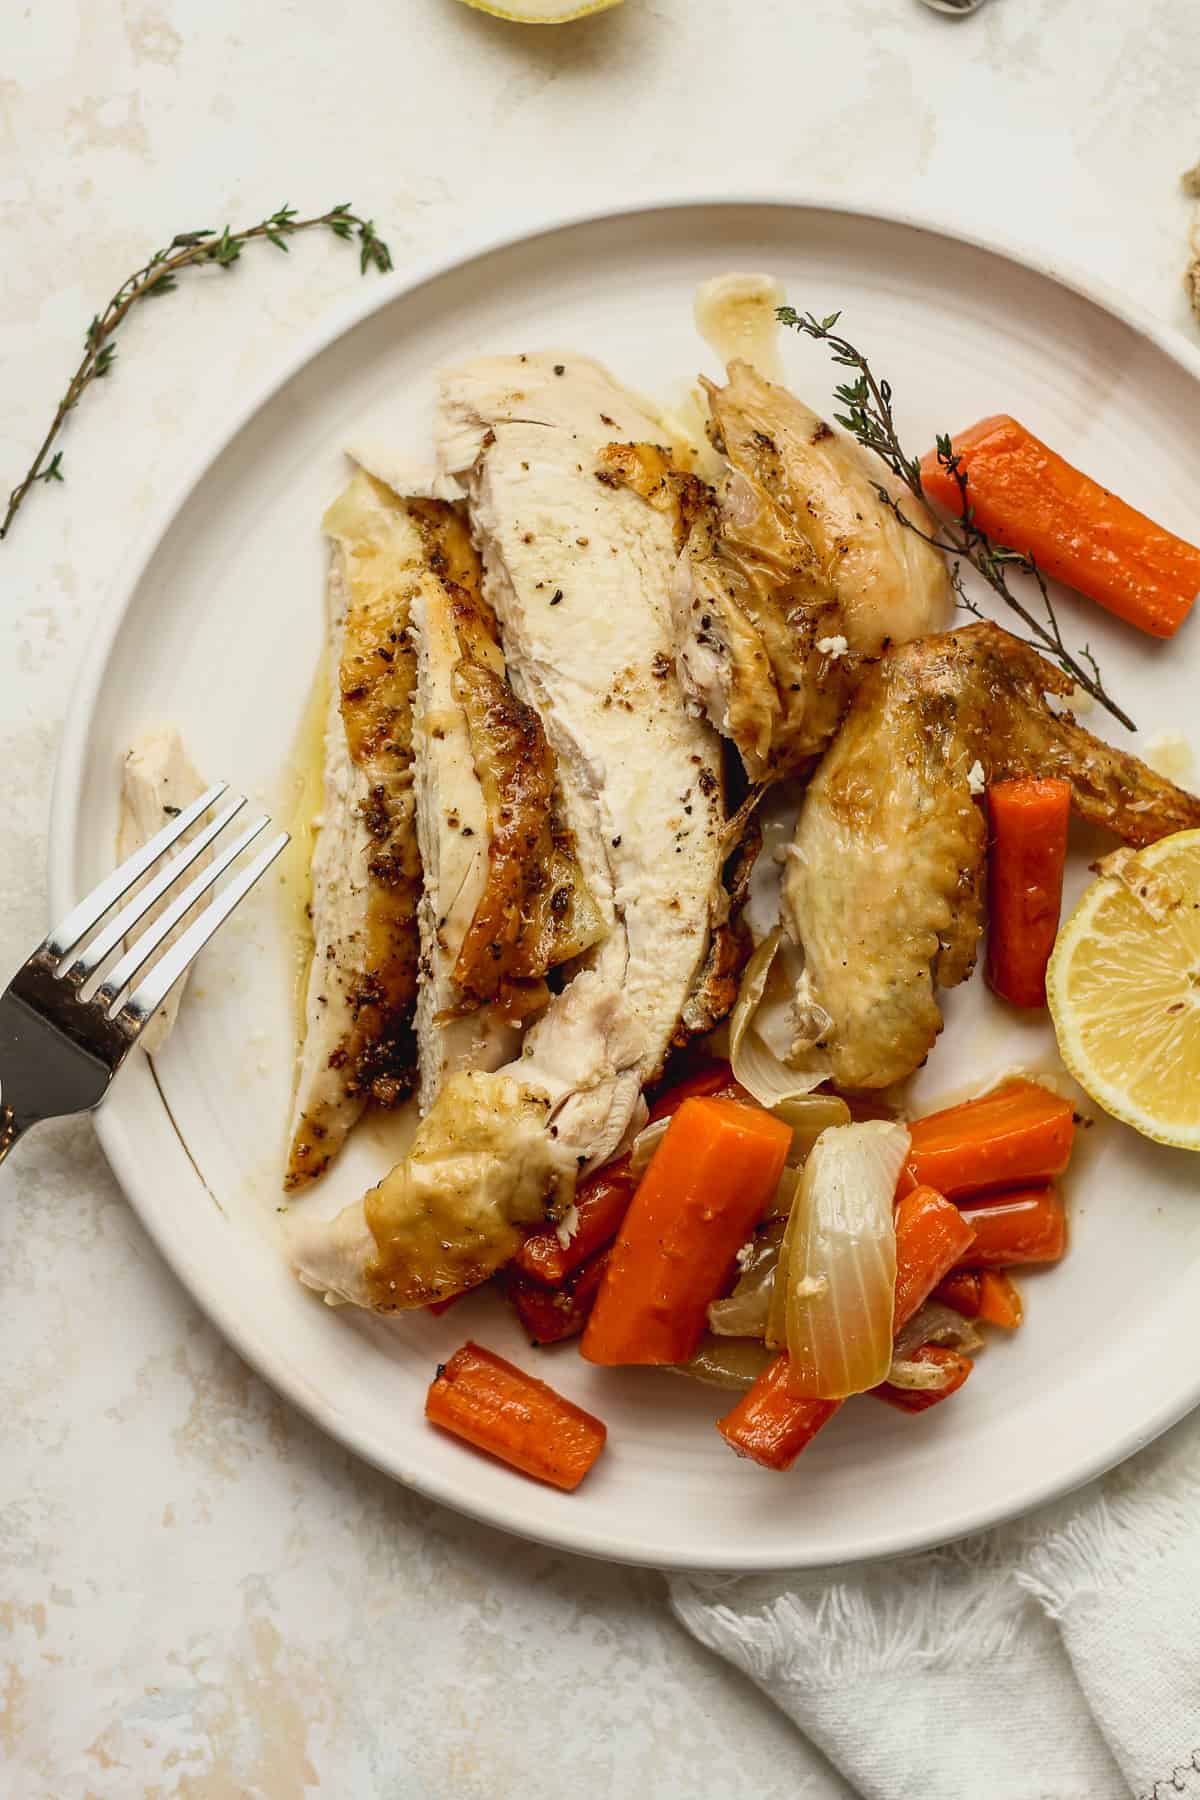 A plate of sliced chicken and carrots.